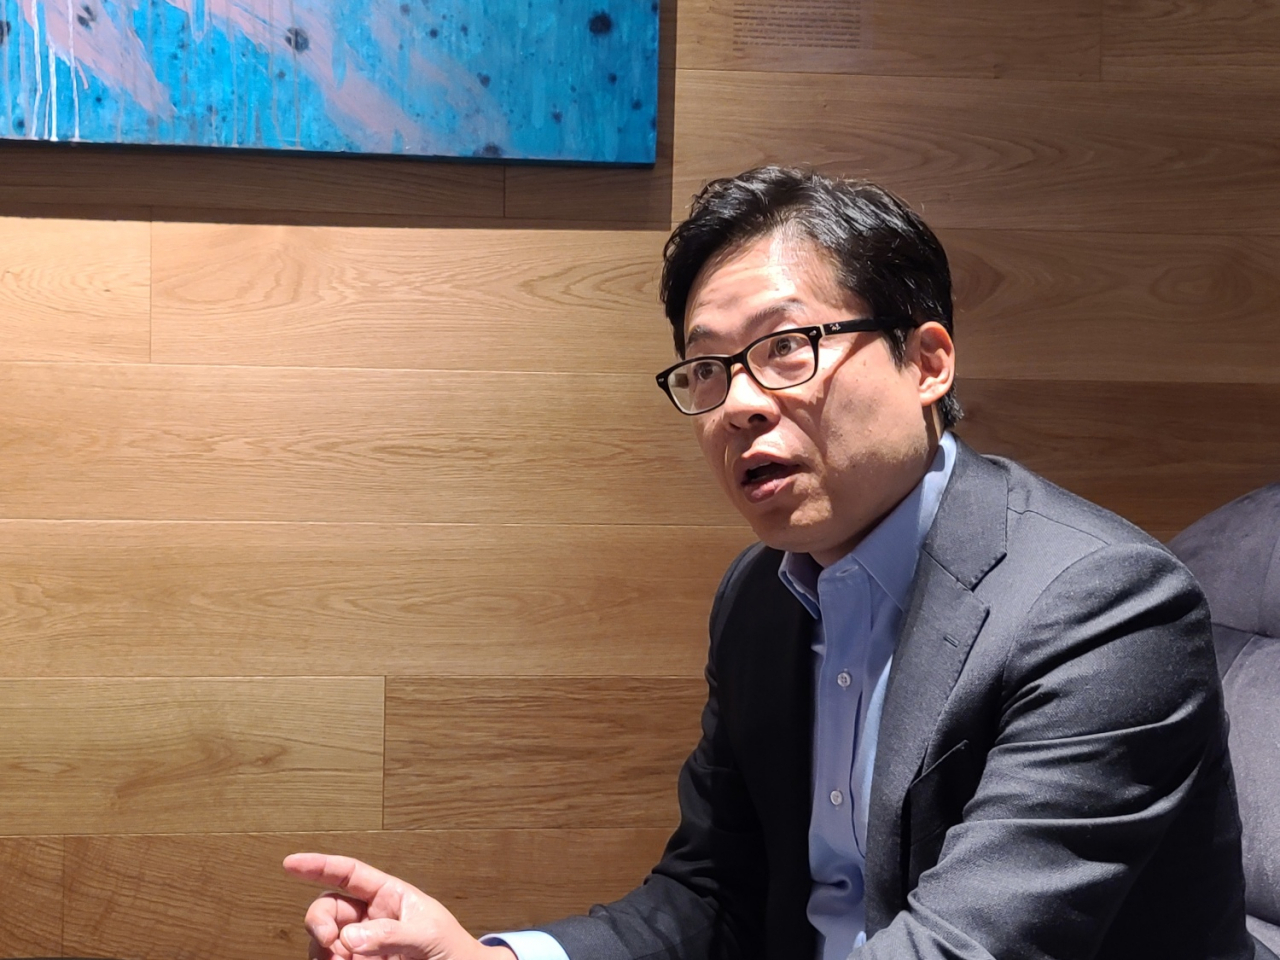 Yuhan USA CEO Yoon Tae-won speaks during an interview held on the sidelines of the JPMorgan Healthcare Conference in San Francisco on Monday. (The Korea Herald/Shim Woo-hyun)